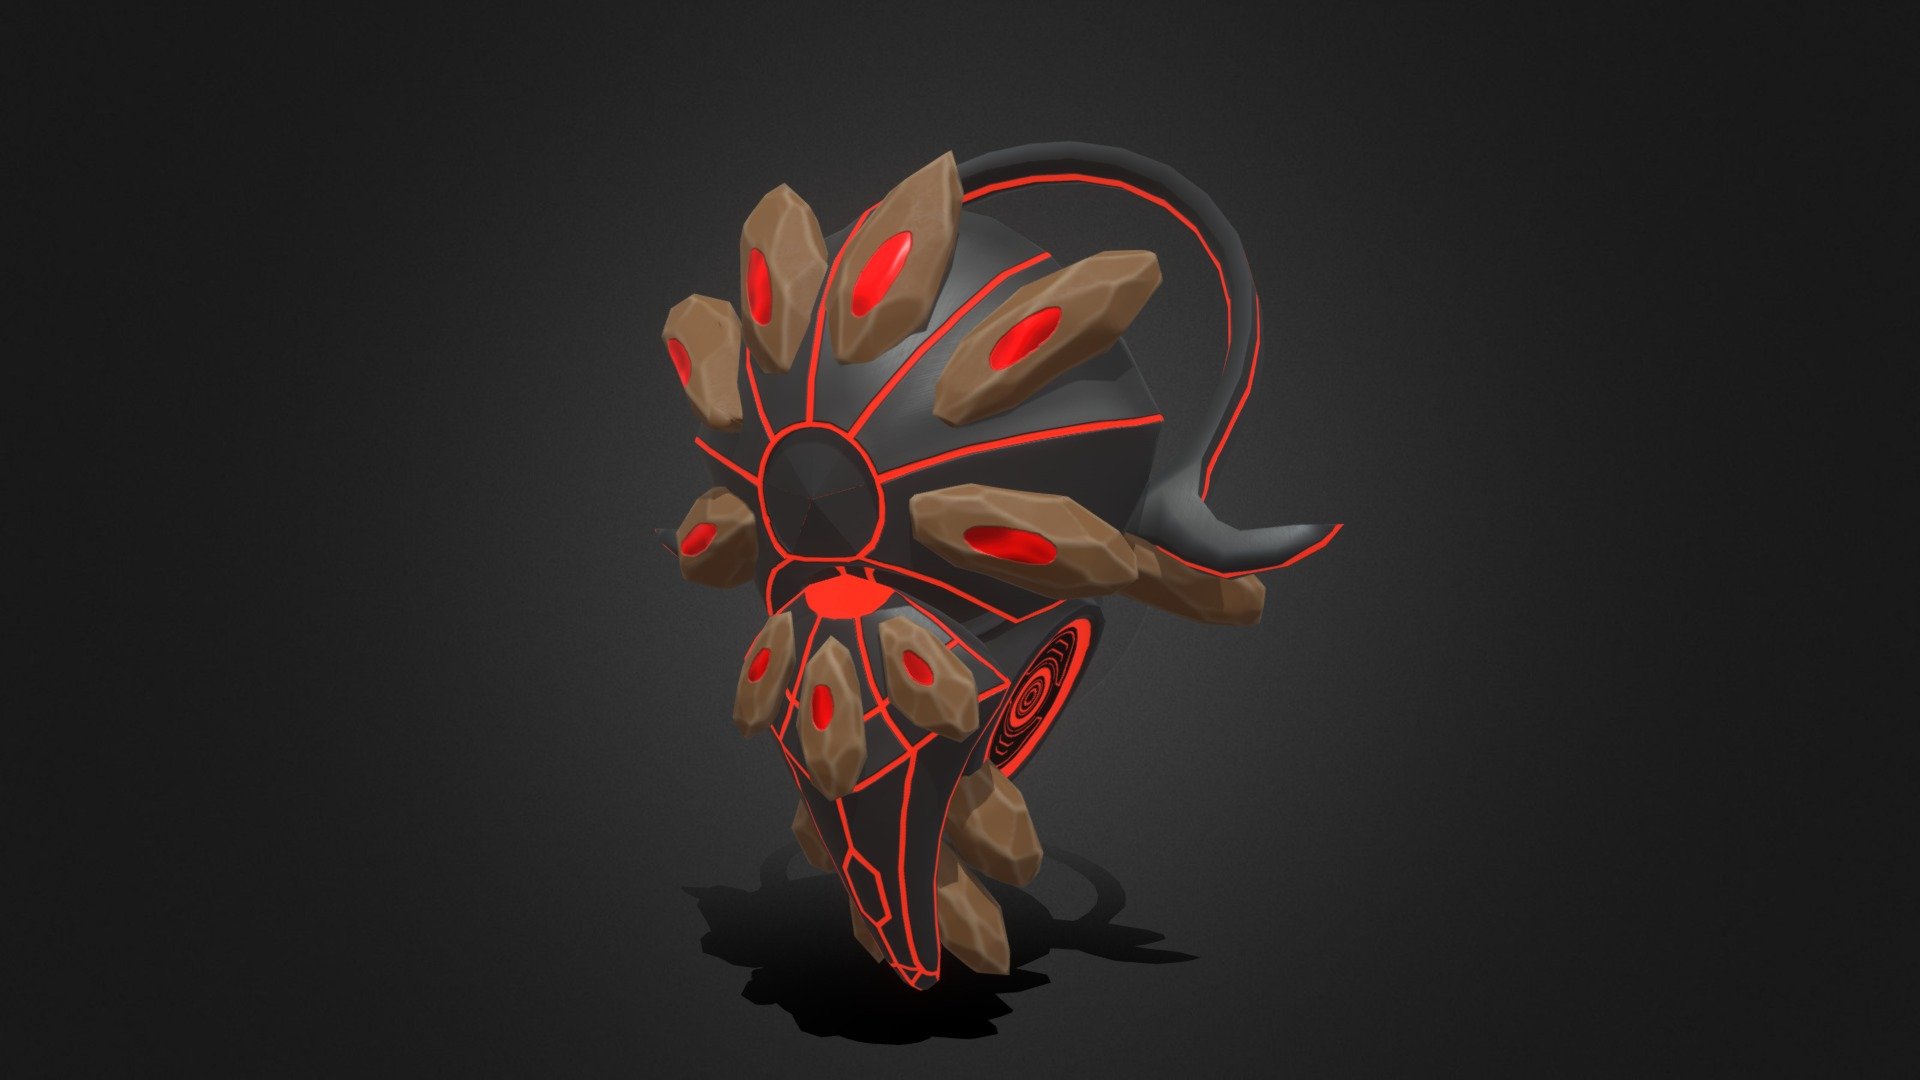 A Guardian creature i created for the prototype game &ldquo;Awaken